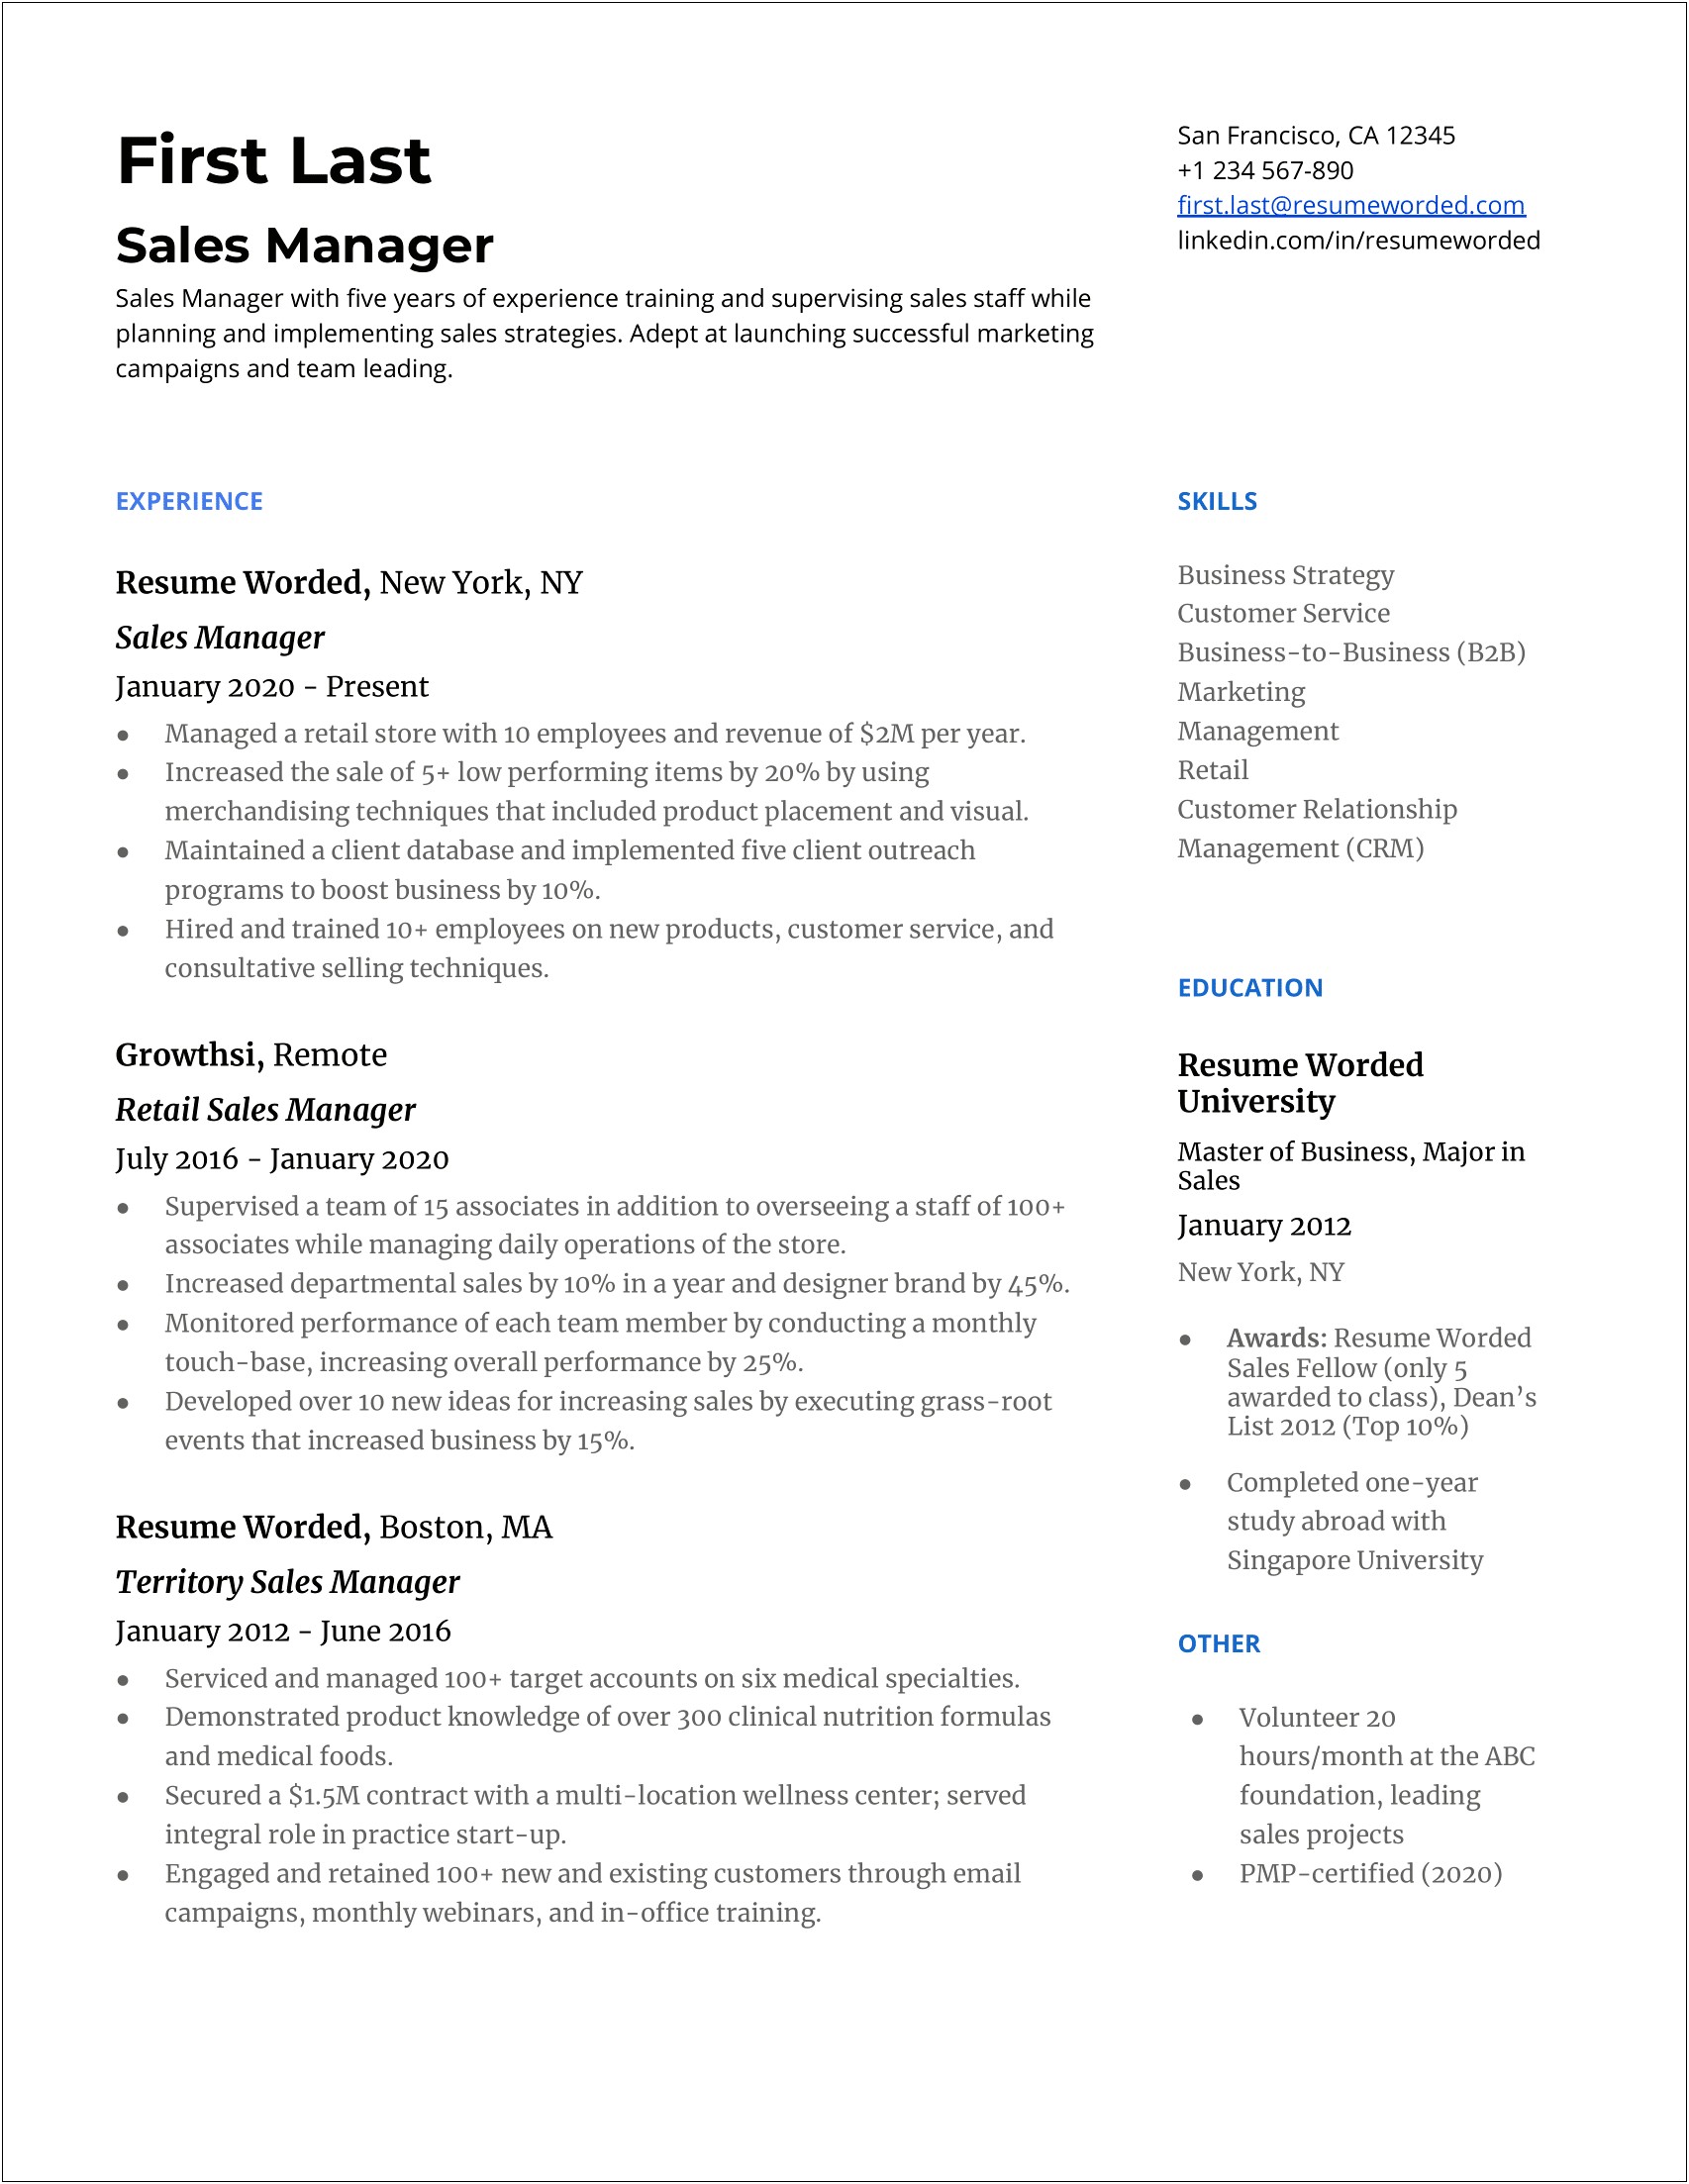 Sales Manager Job Resume Example